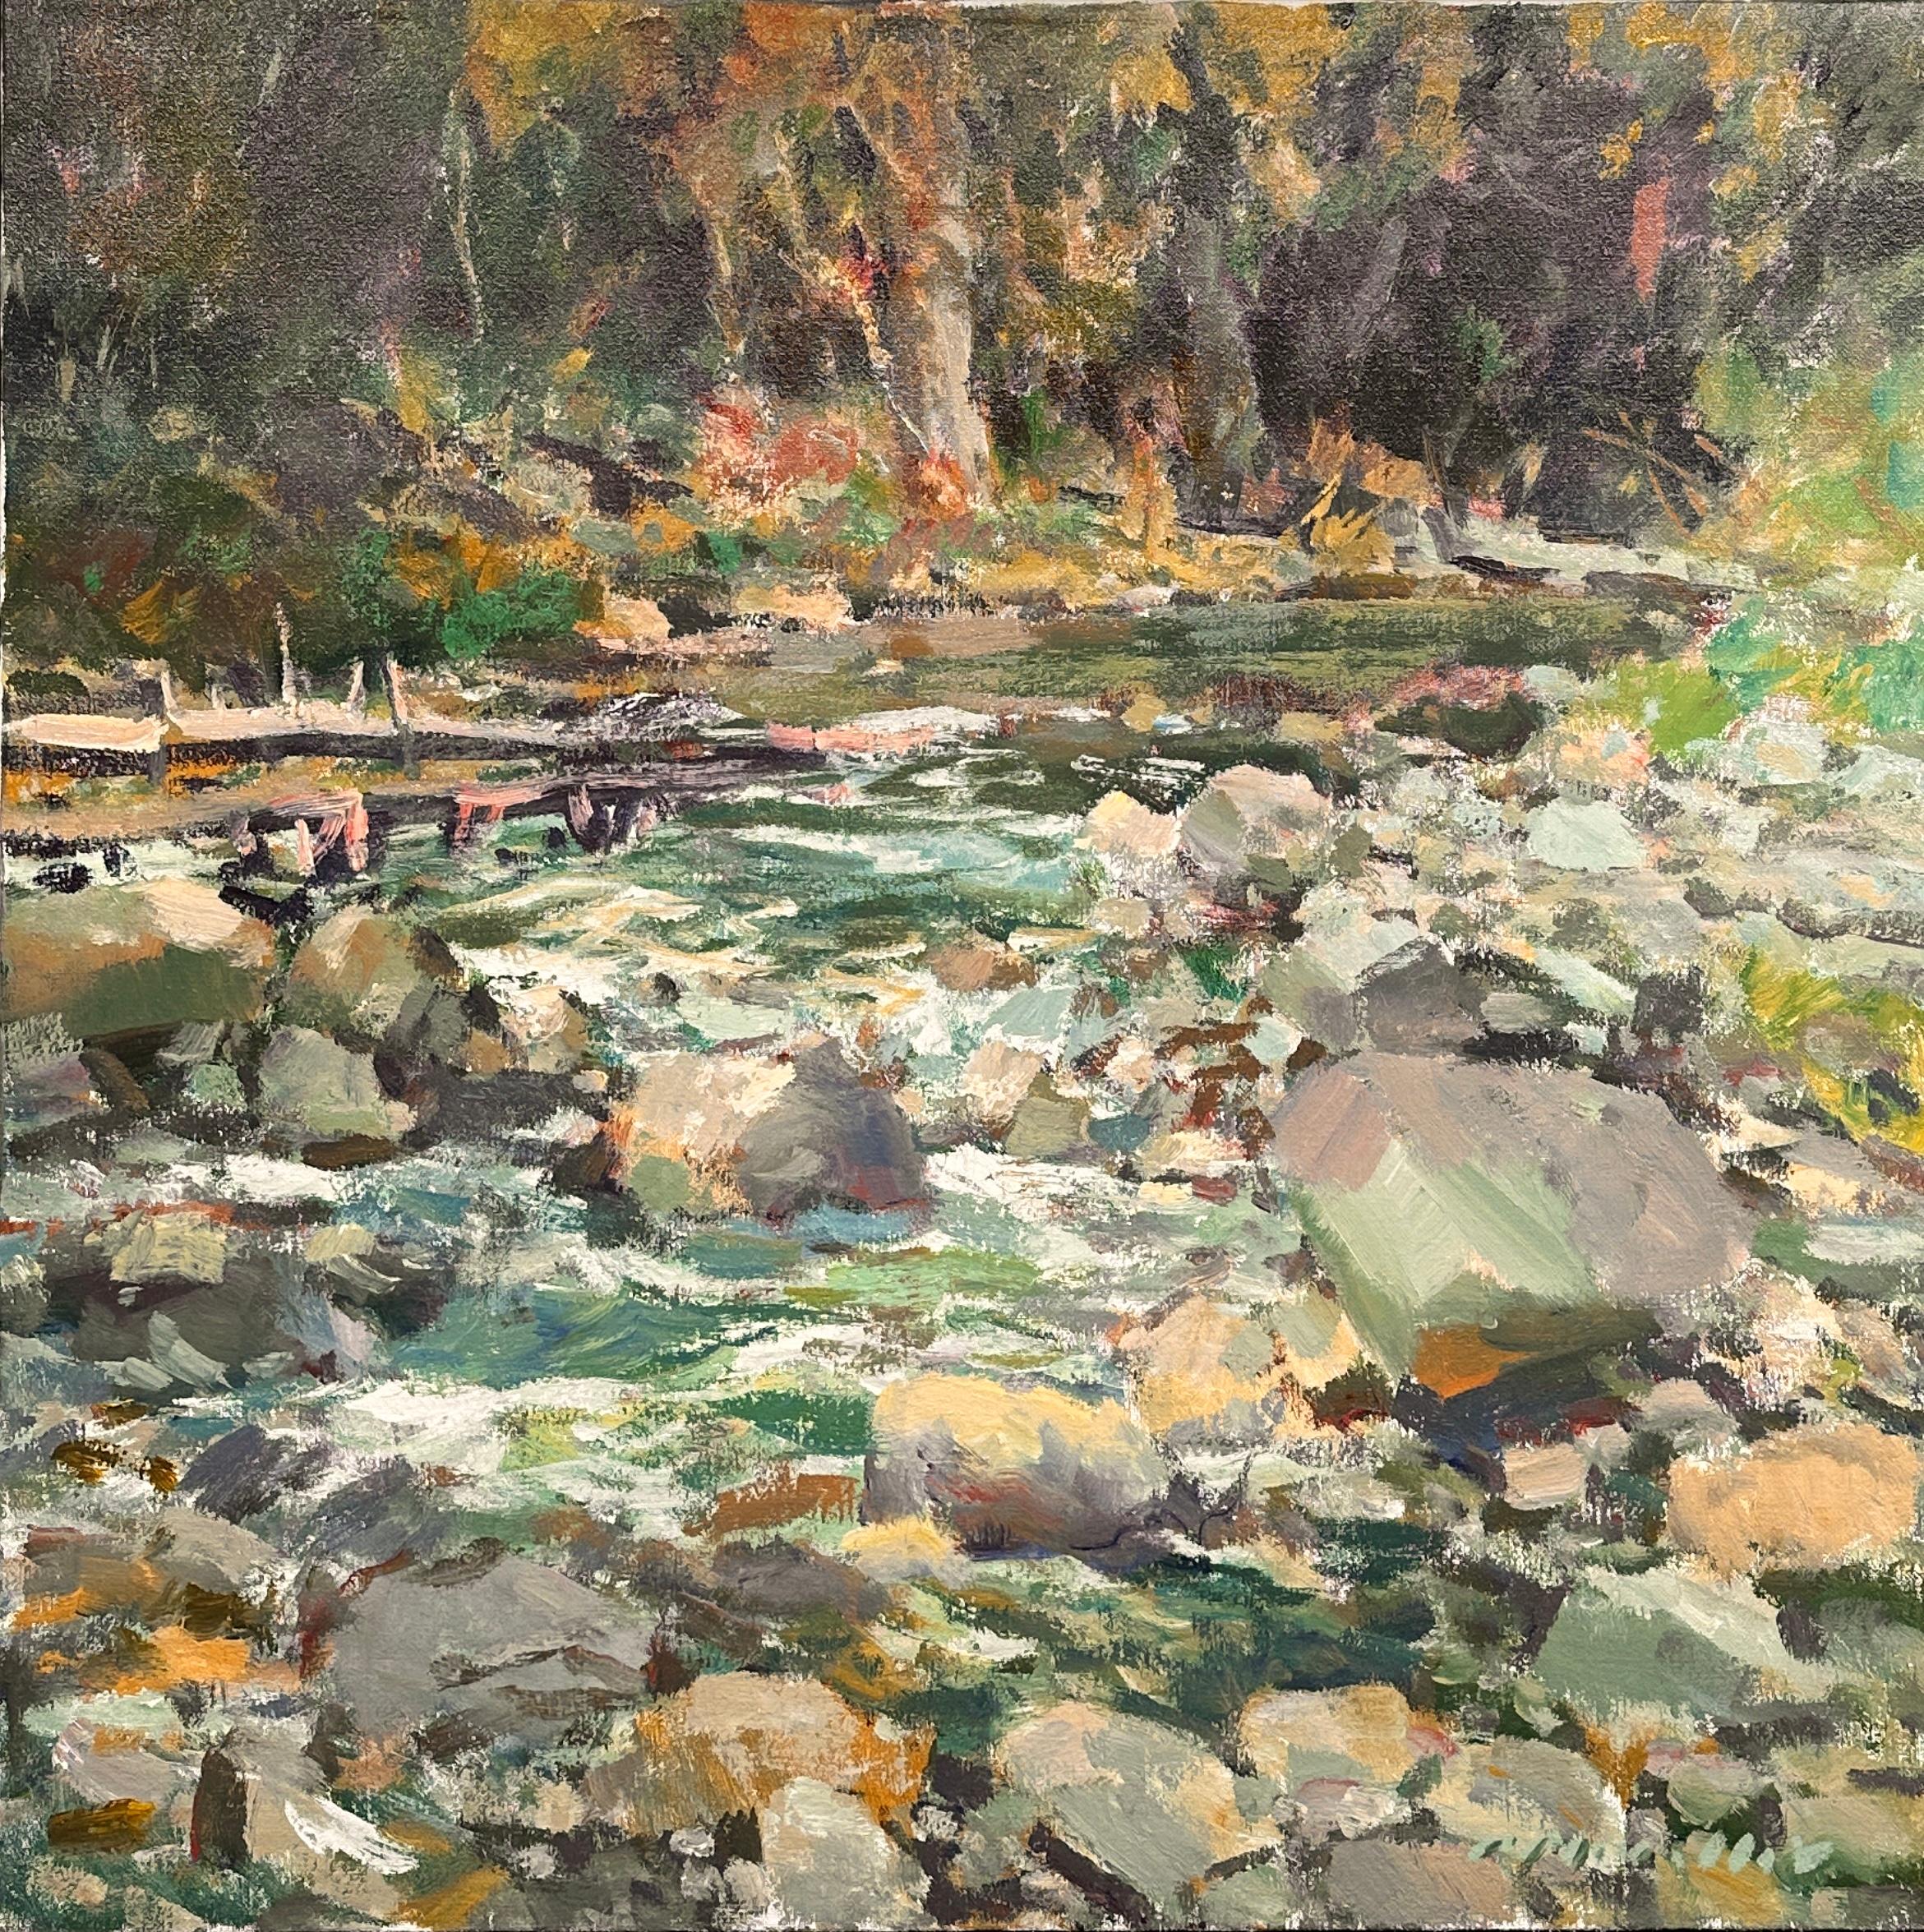 "Mountain Stream" by Charles Movalli (1945-2016) is a breathtaking piece. Movalli skillfully employs a rich and harmonious color palette to evoke the play of light and shadow, creating a visual symphony that dances across the canvas. 

30x30 does